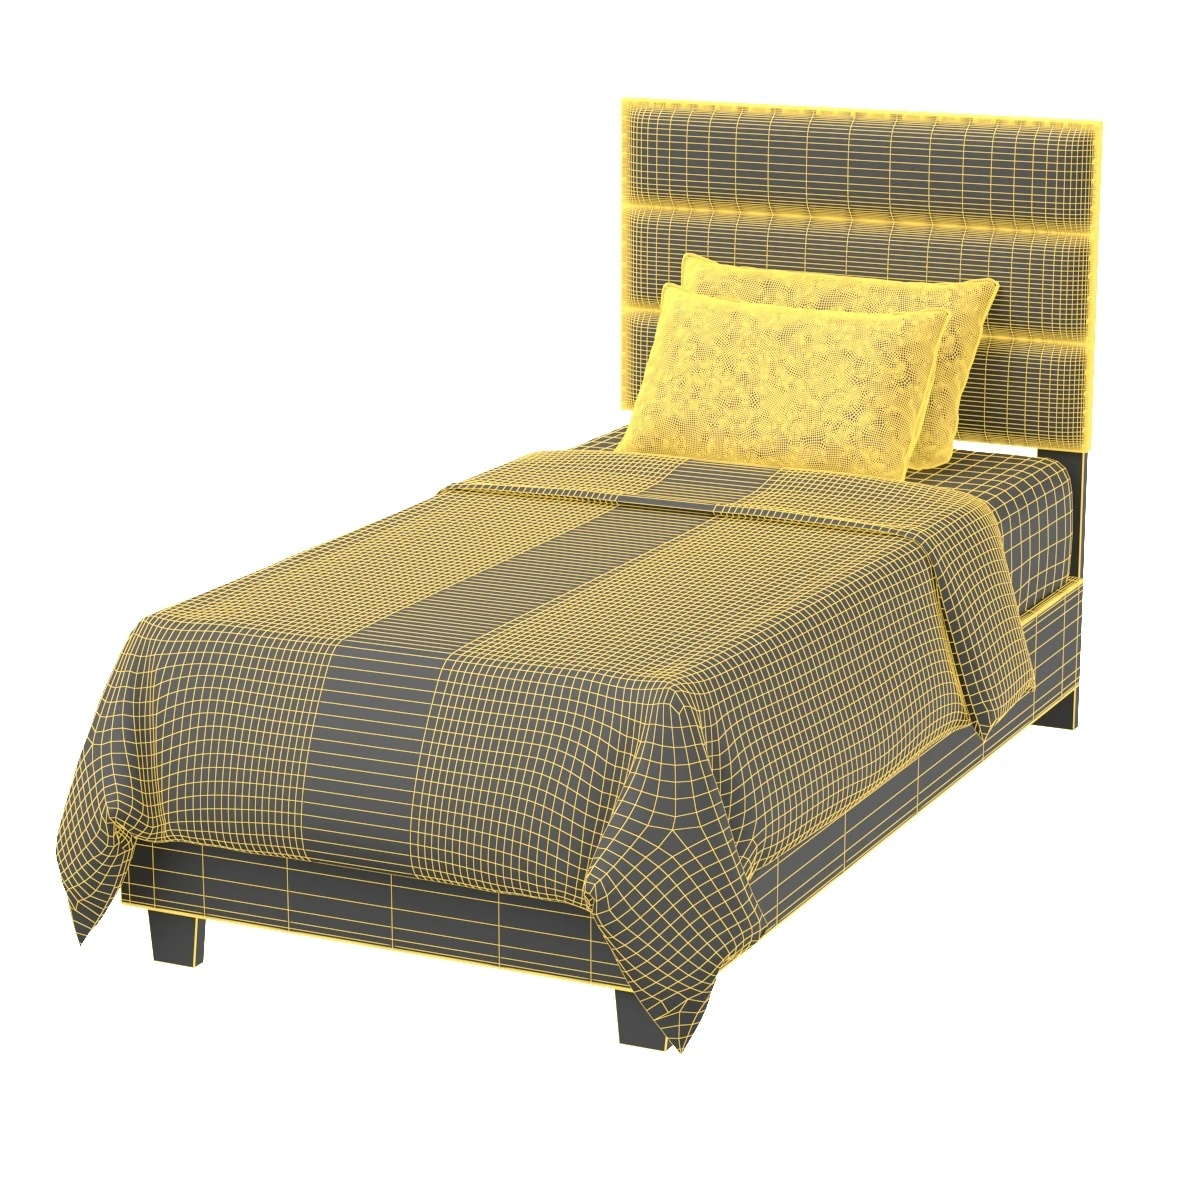 Collection of Four Single Bed 3D Bed Models 3D Model_01